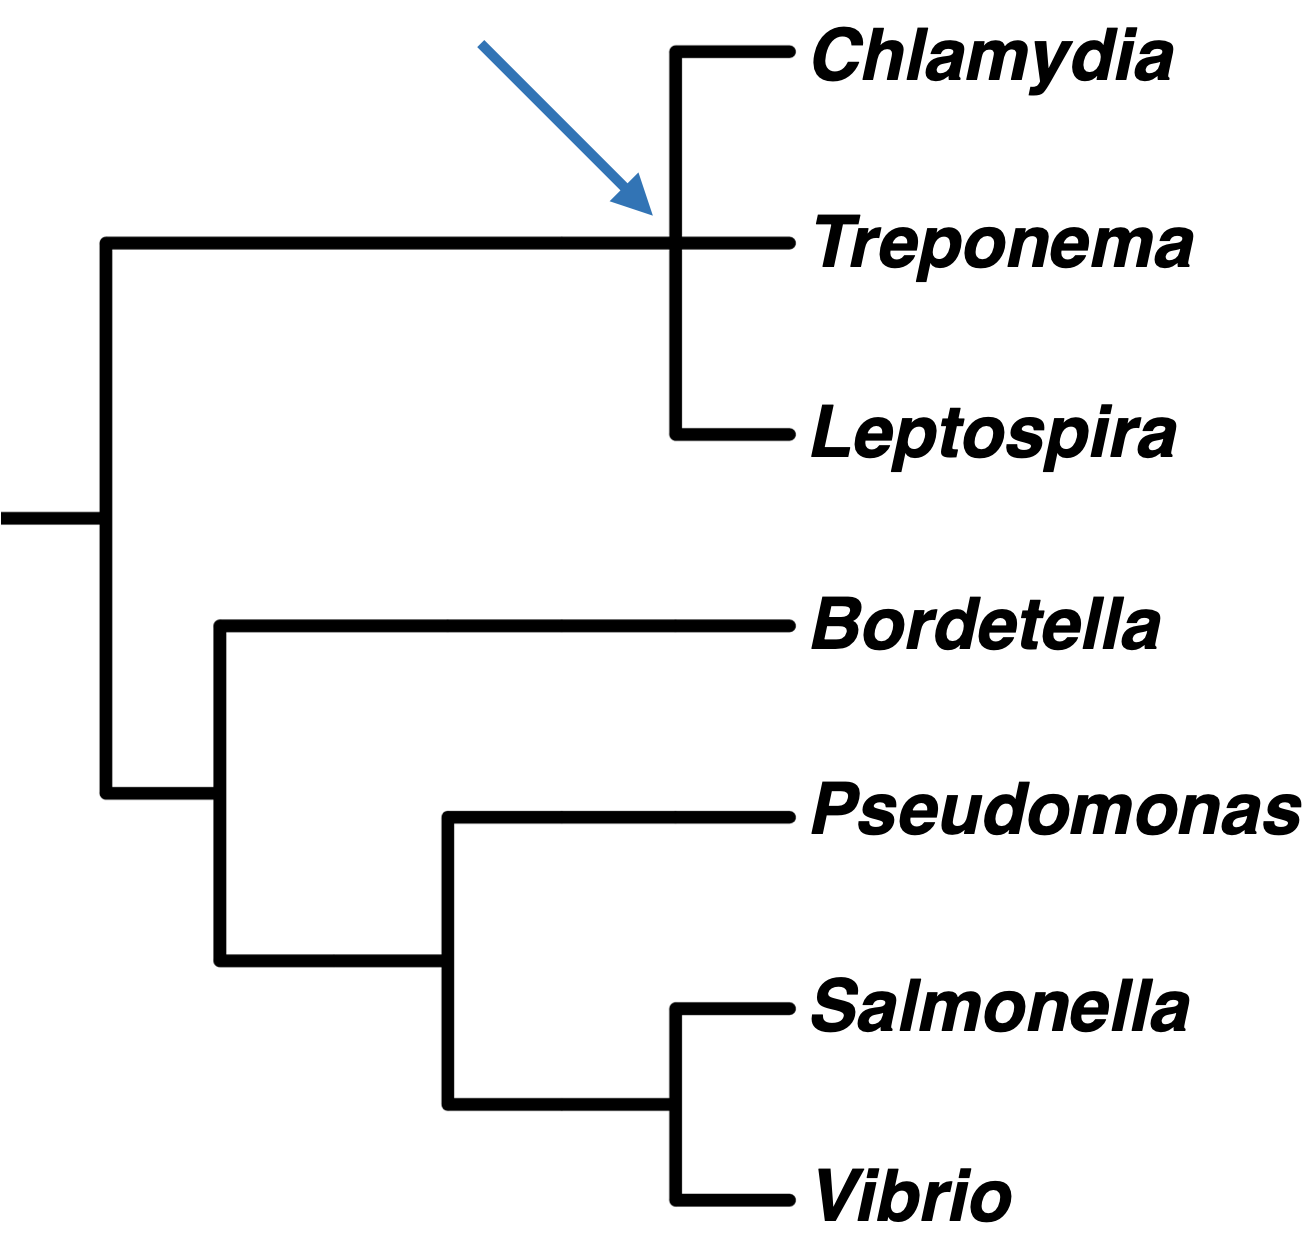 This tree starts with a root that splits into two branches. Branch A splits into three branches, A.1, A.2, and A.3. A.1 reads Chlamydia, A.2 reads Treponema, and A.3 reads Leptospira.